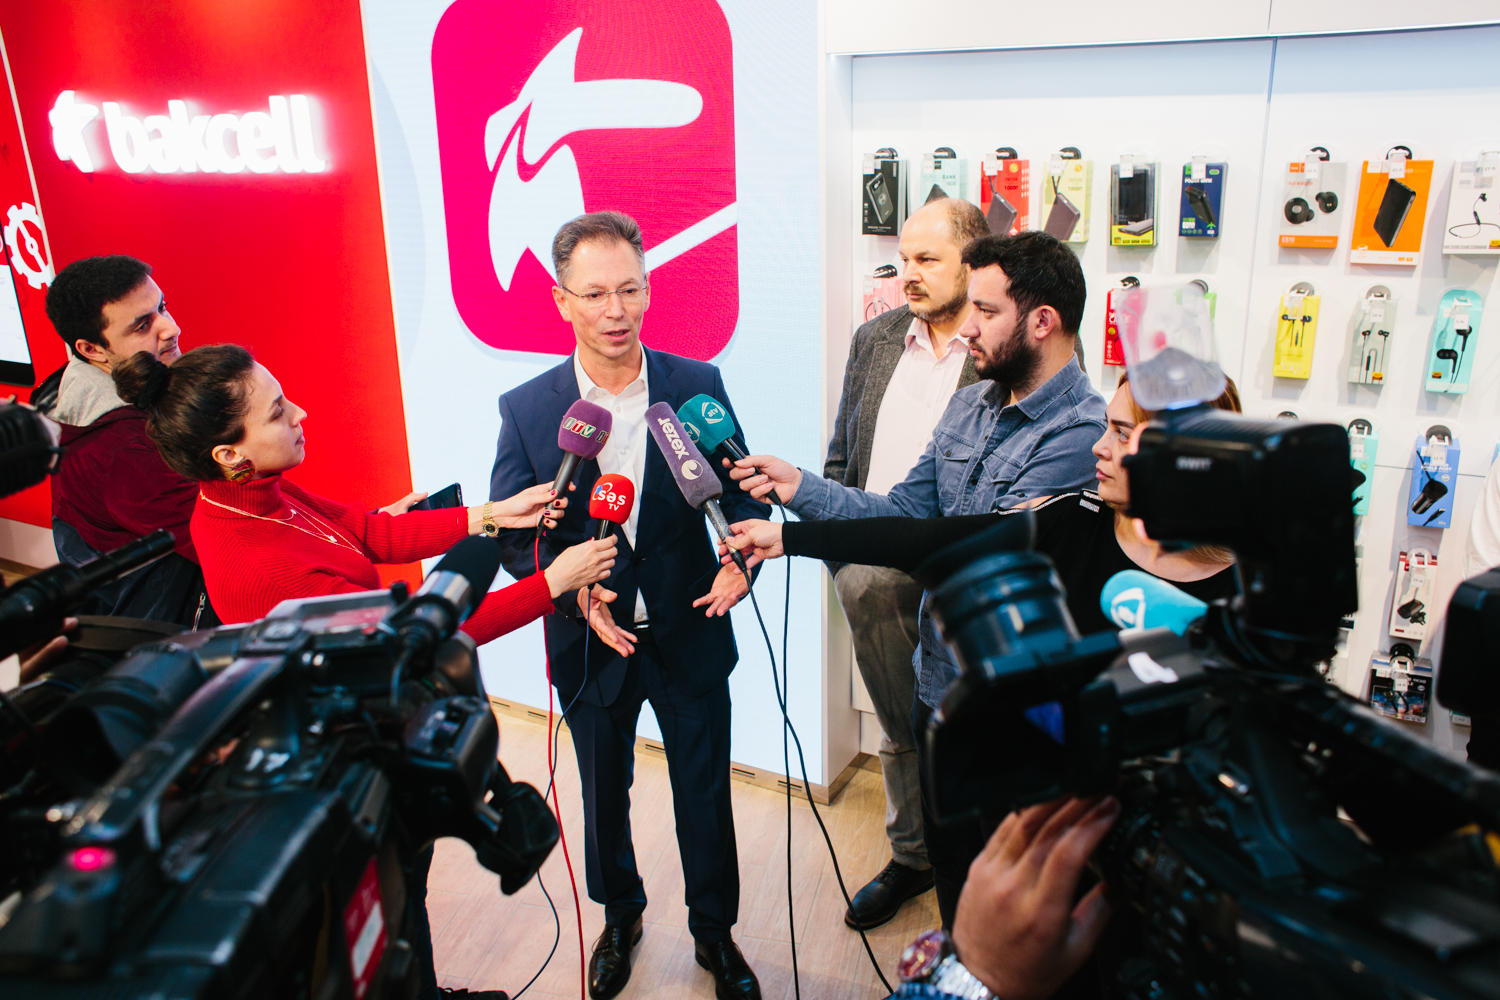 First Bakcell concept store with brand new design opens in center of Baku (VIDEO/PHOTO)